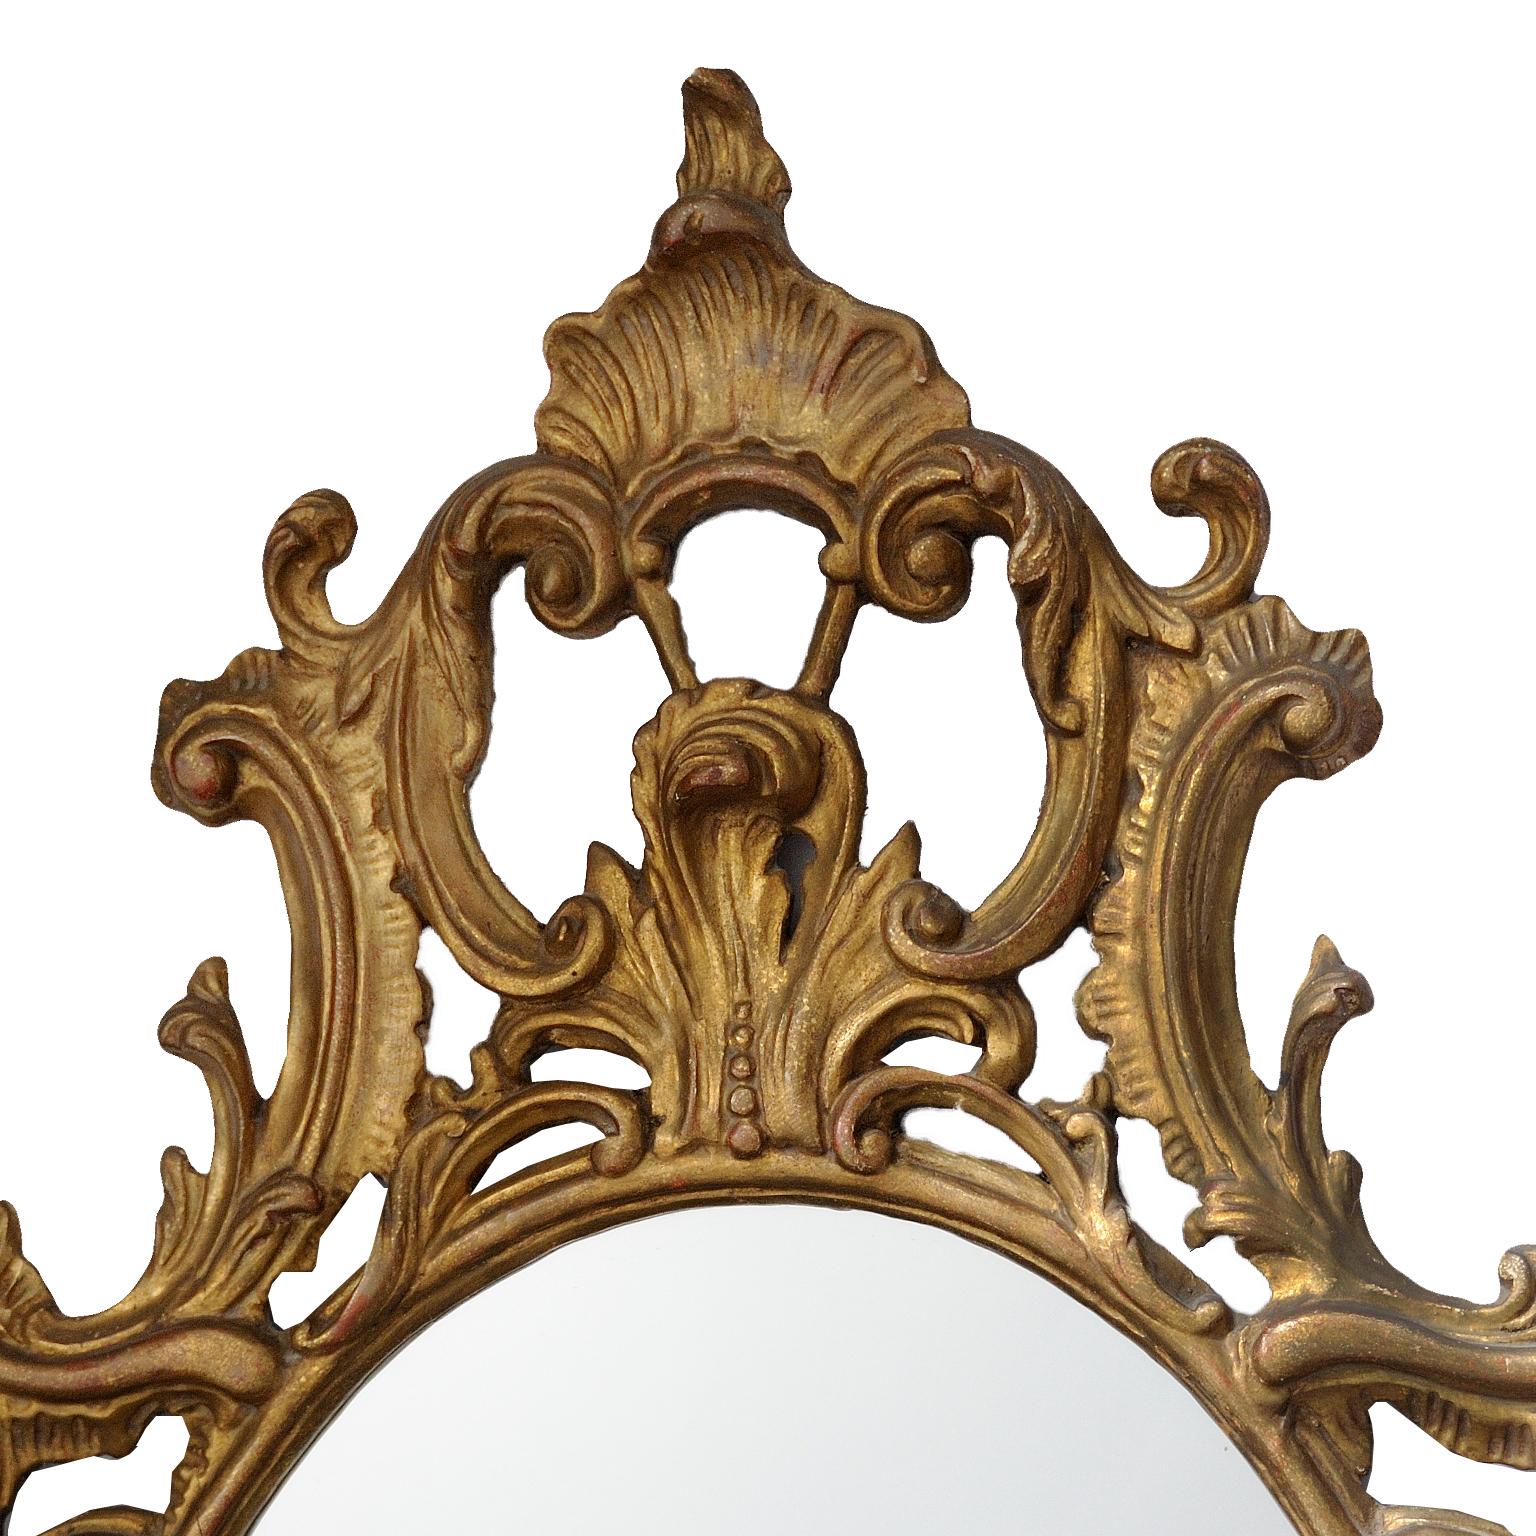 This is a very attractive and large mid-19th century Chippendale style giltwood Rococo mirror of great proportions, circa 1860.